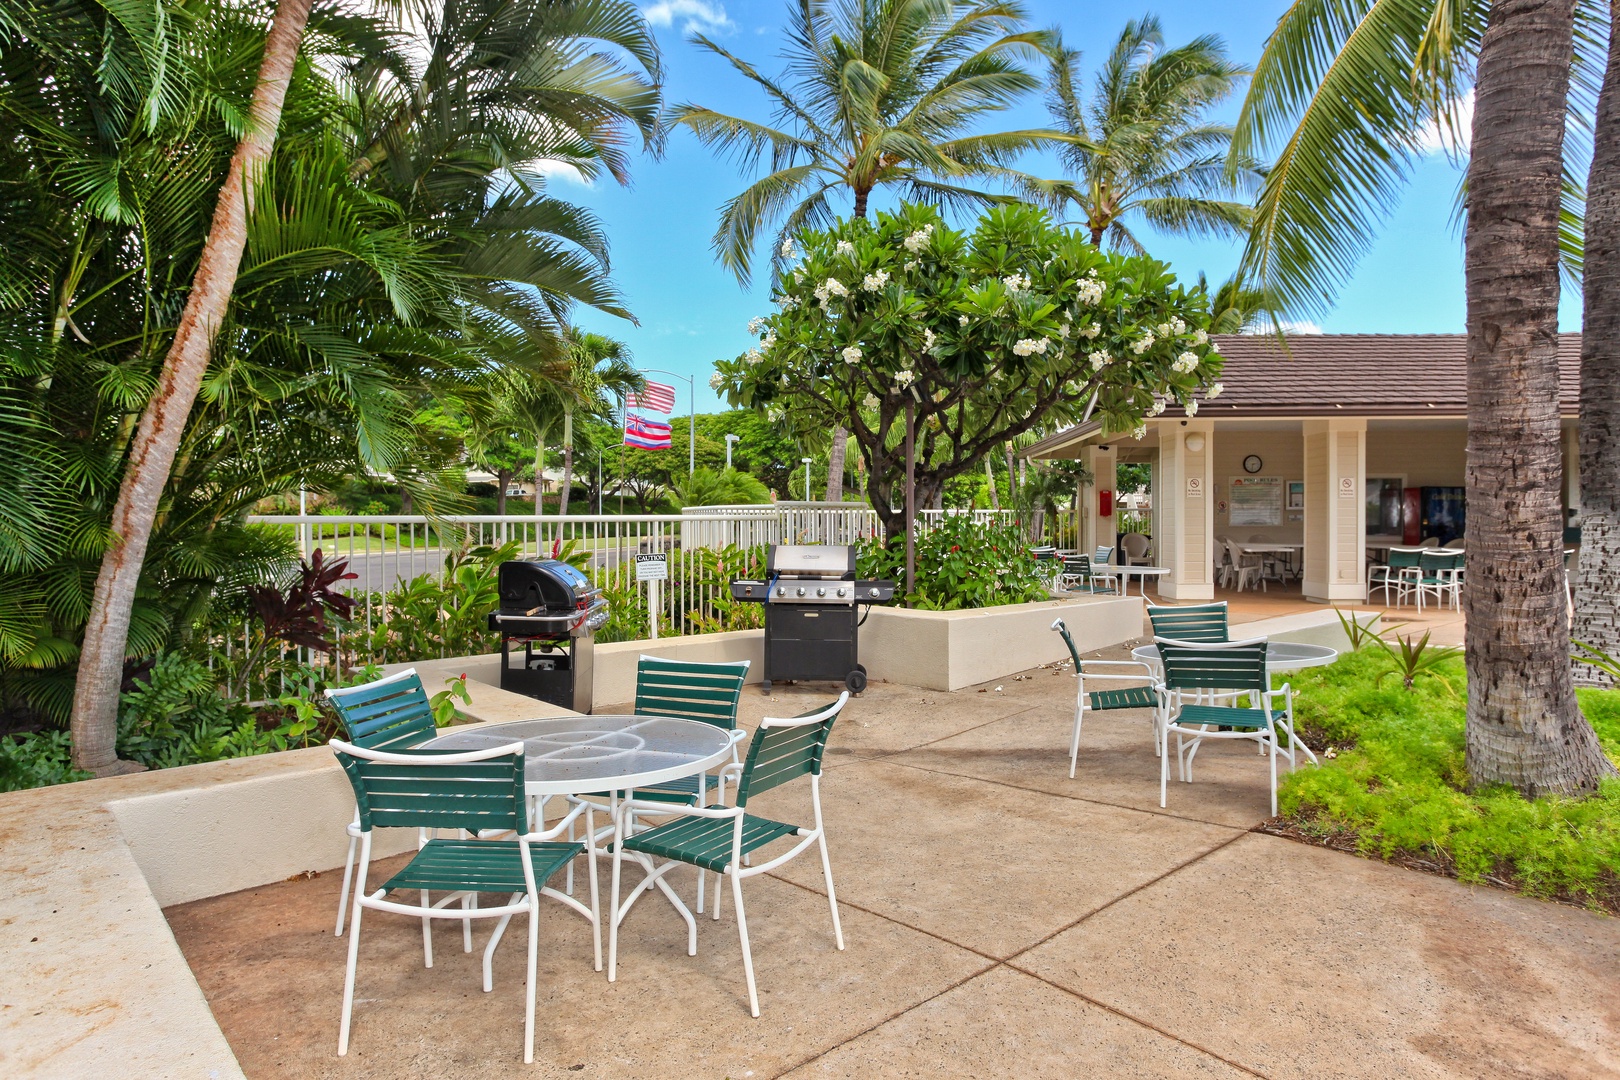 Kapolei Vacation Rentals, Fairways at Ko Olina 27H - The BBQ grills and patio seating by the community pool.